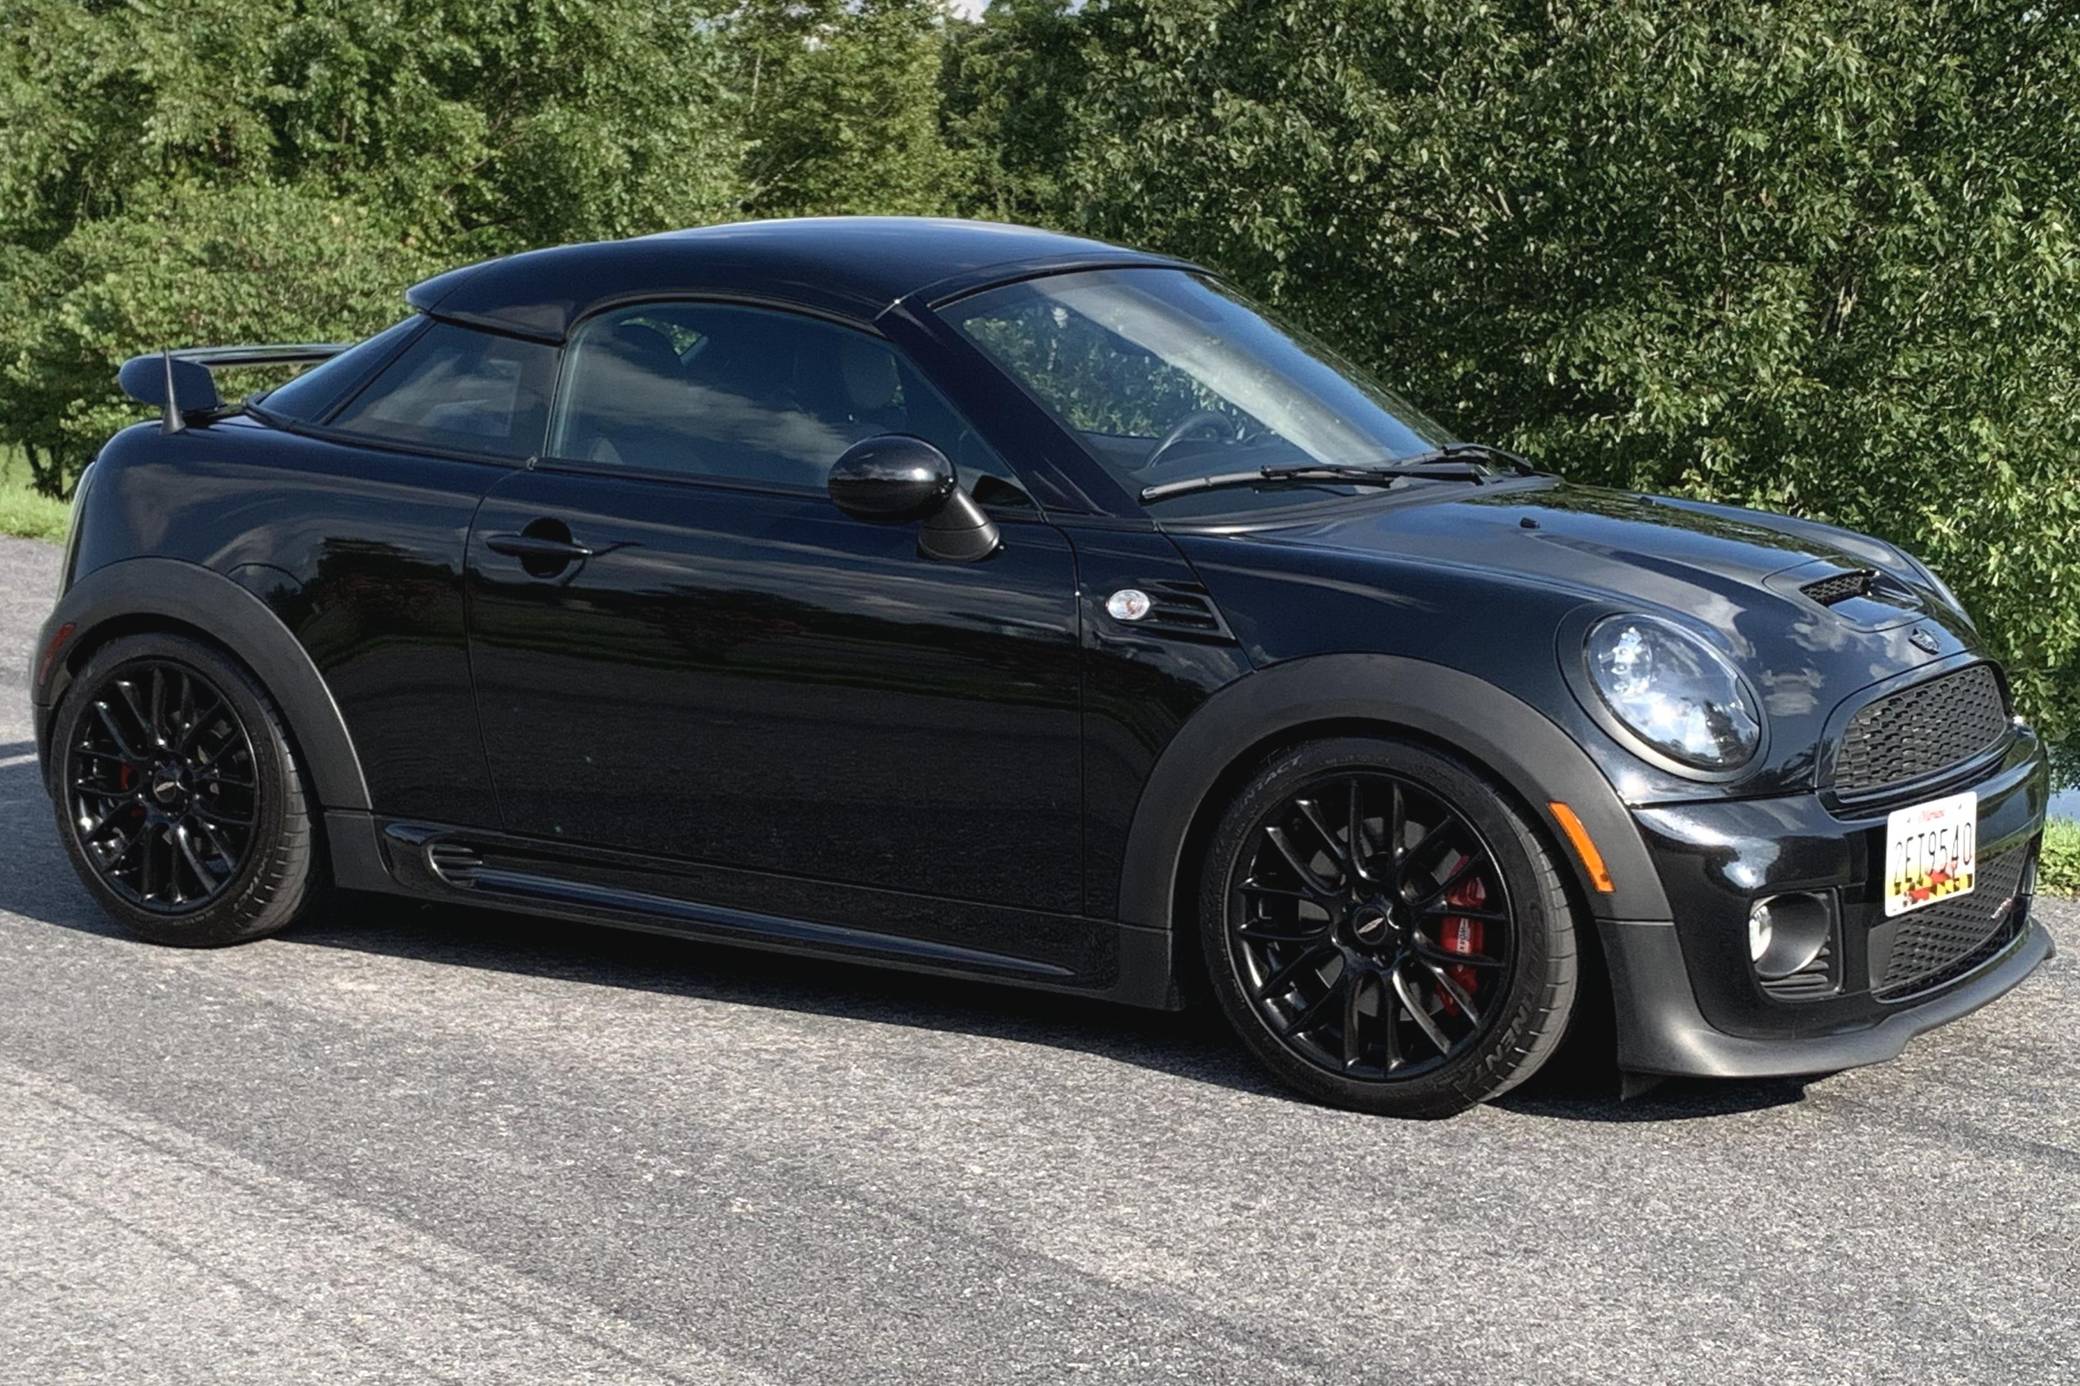 R59 JCW Roadster With JCW wing  Motor works, Roadsters, Bmw car